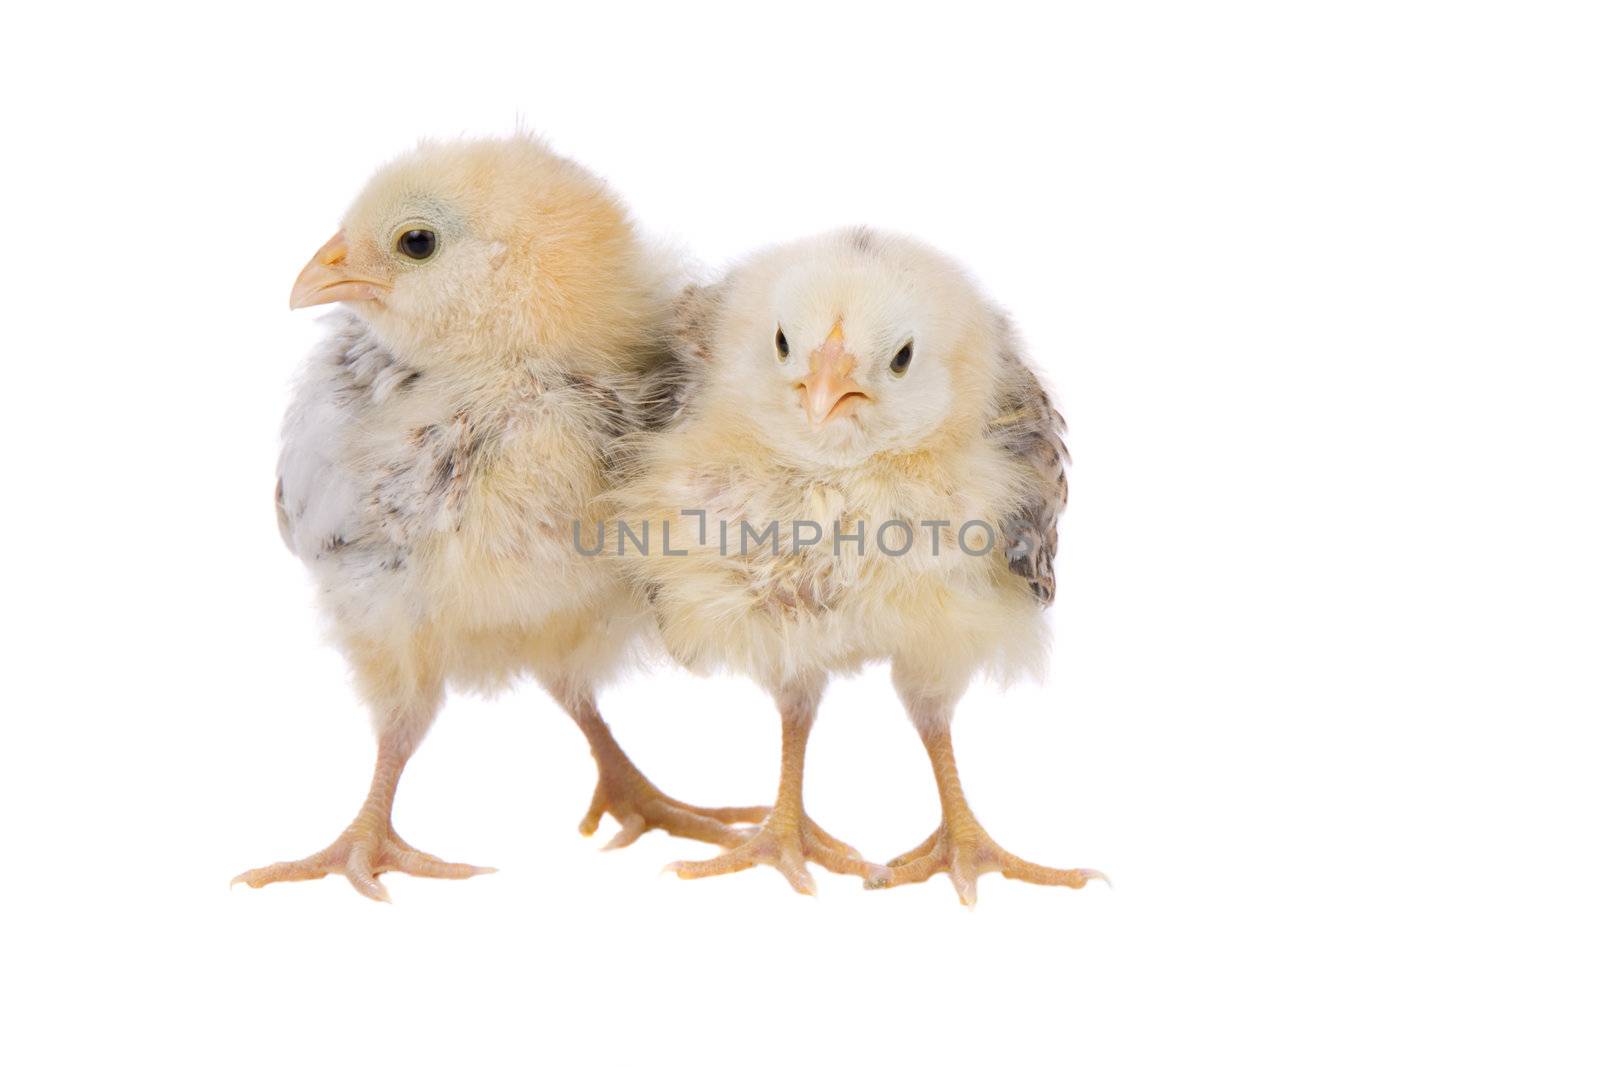 Two cute little chicken on white background